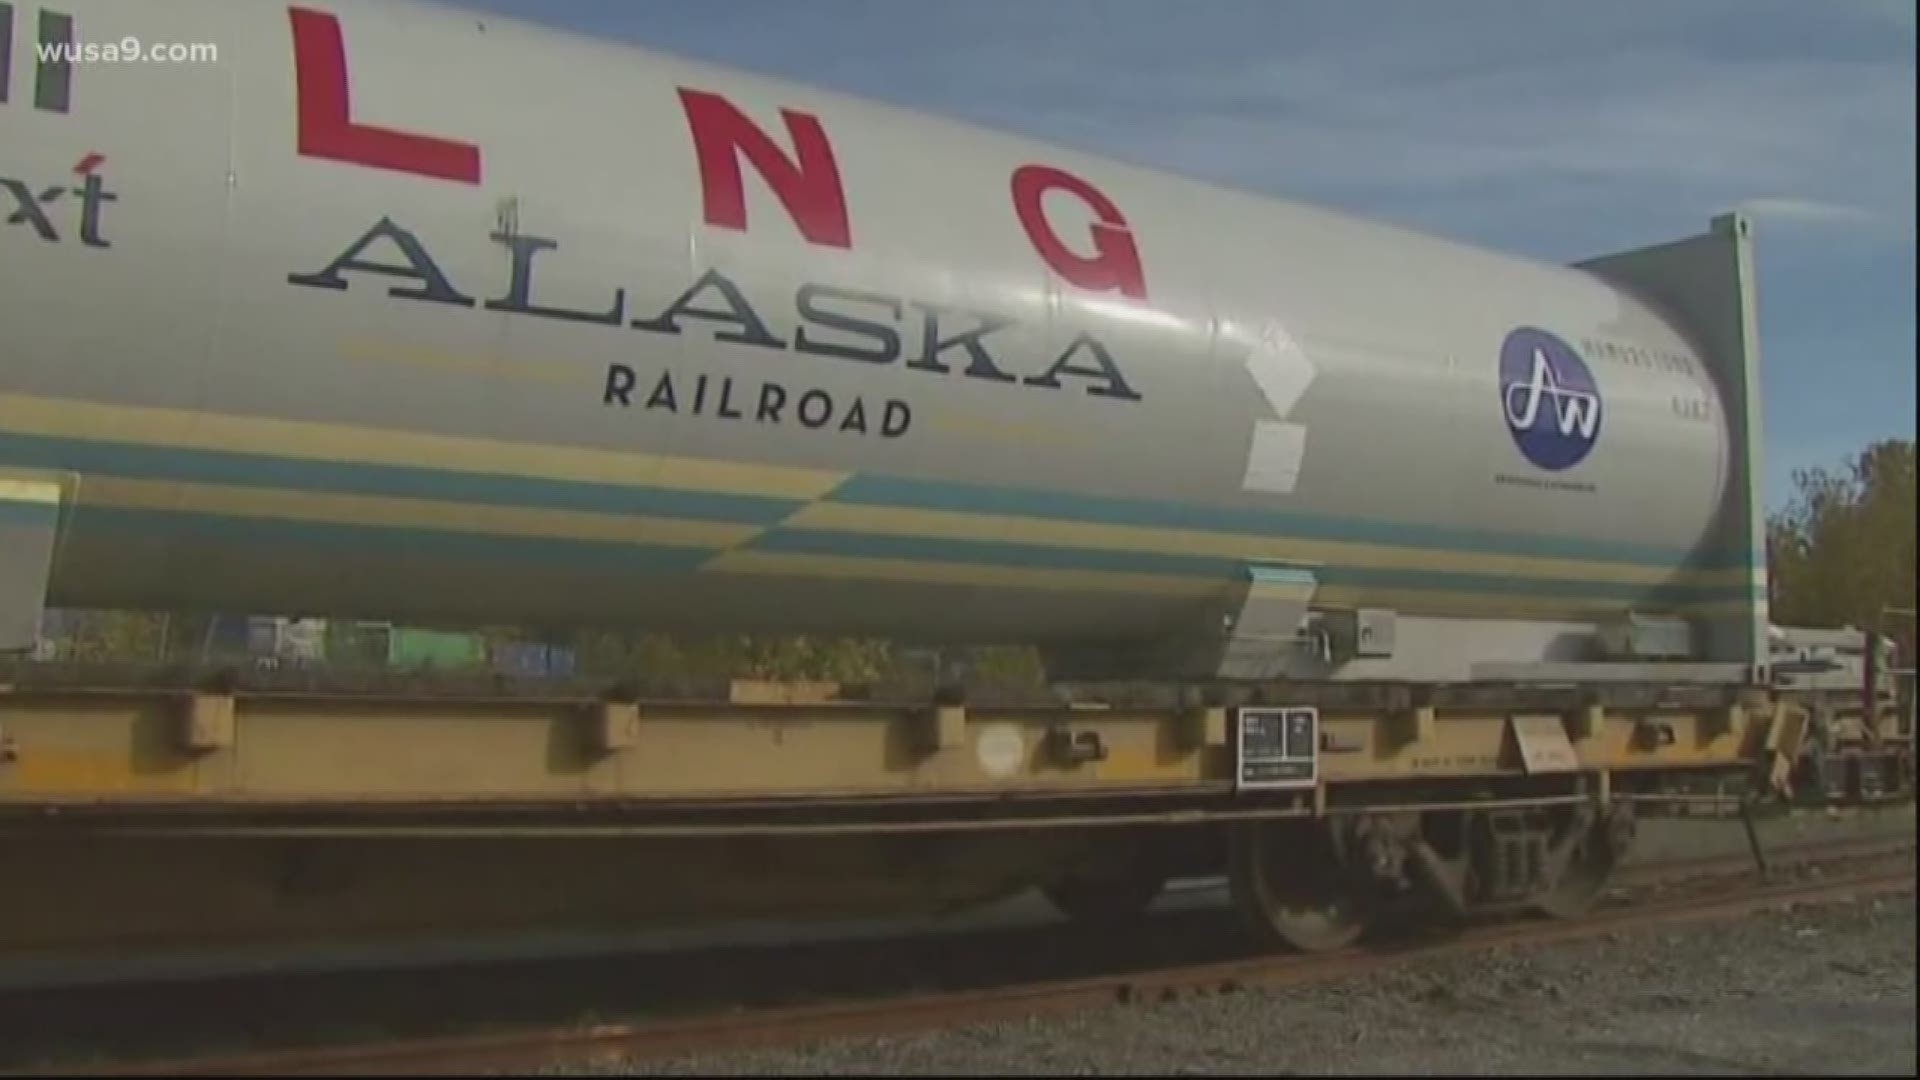 Maryland and DC are joining 14 other states in an attempt to stop loading supercooled "liquified natural gas" onto rail cars and moving it by train.